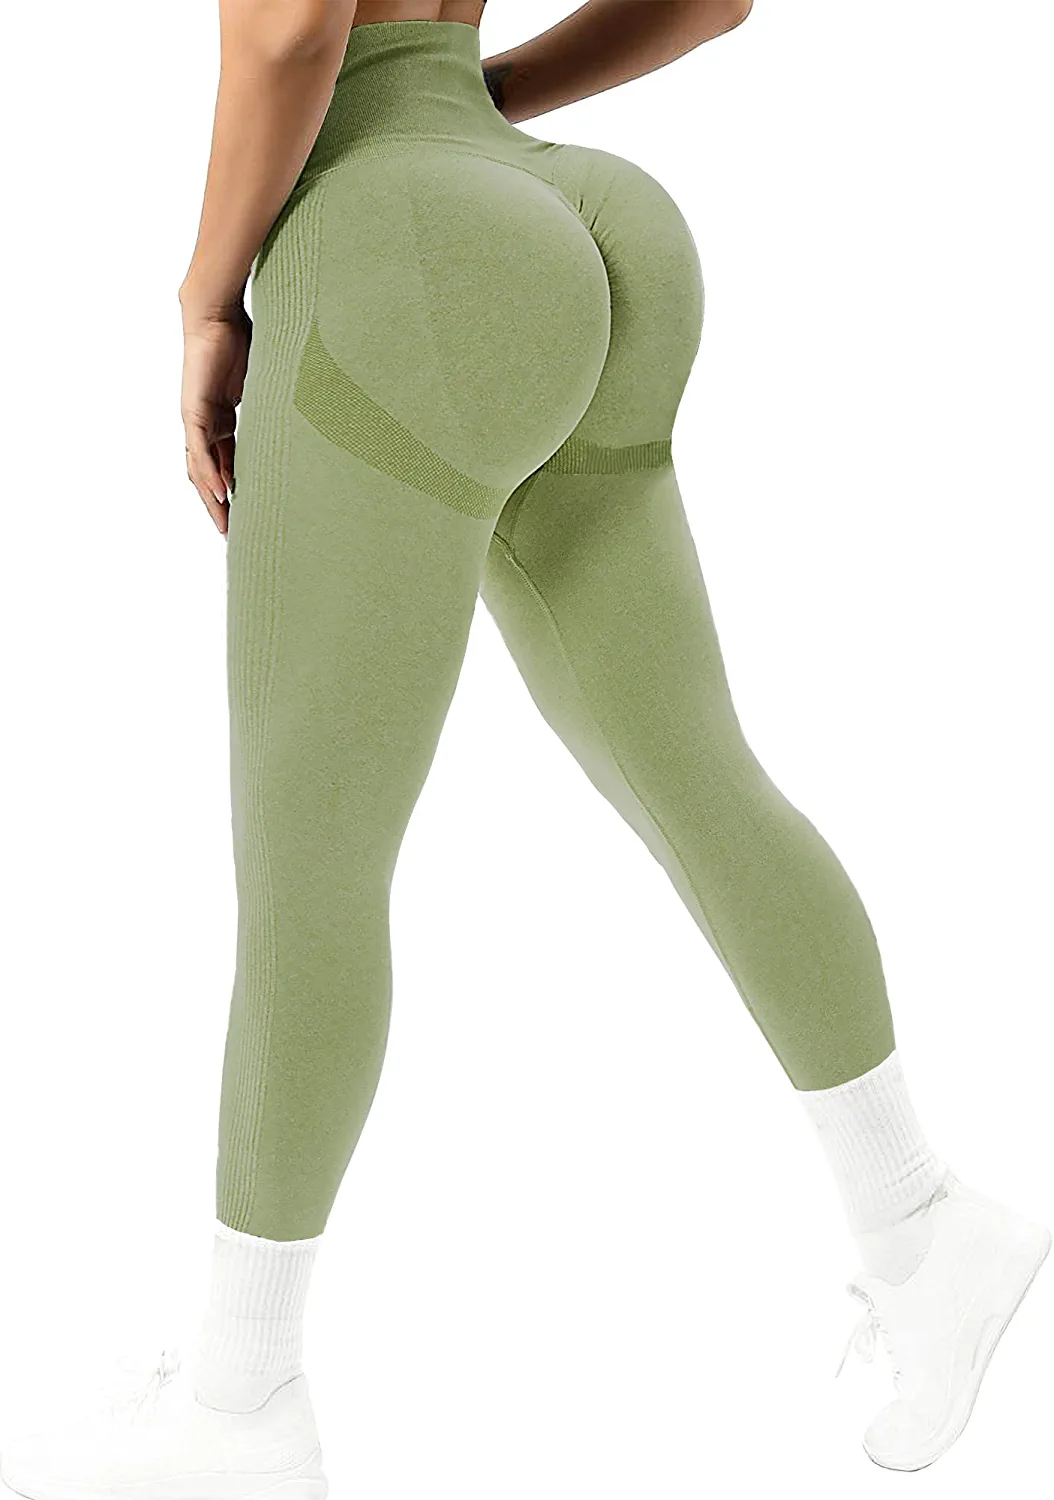 COMFREE 2 Pack High Waist Yoga Pants with Pockets for Women Tummy